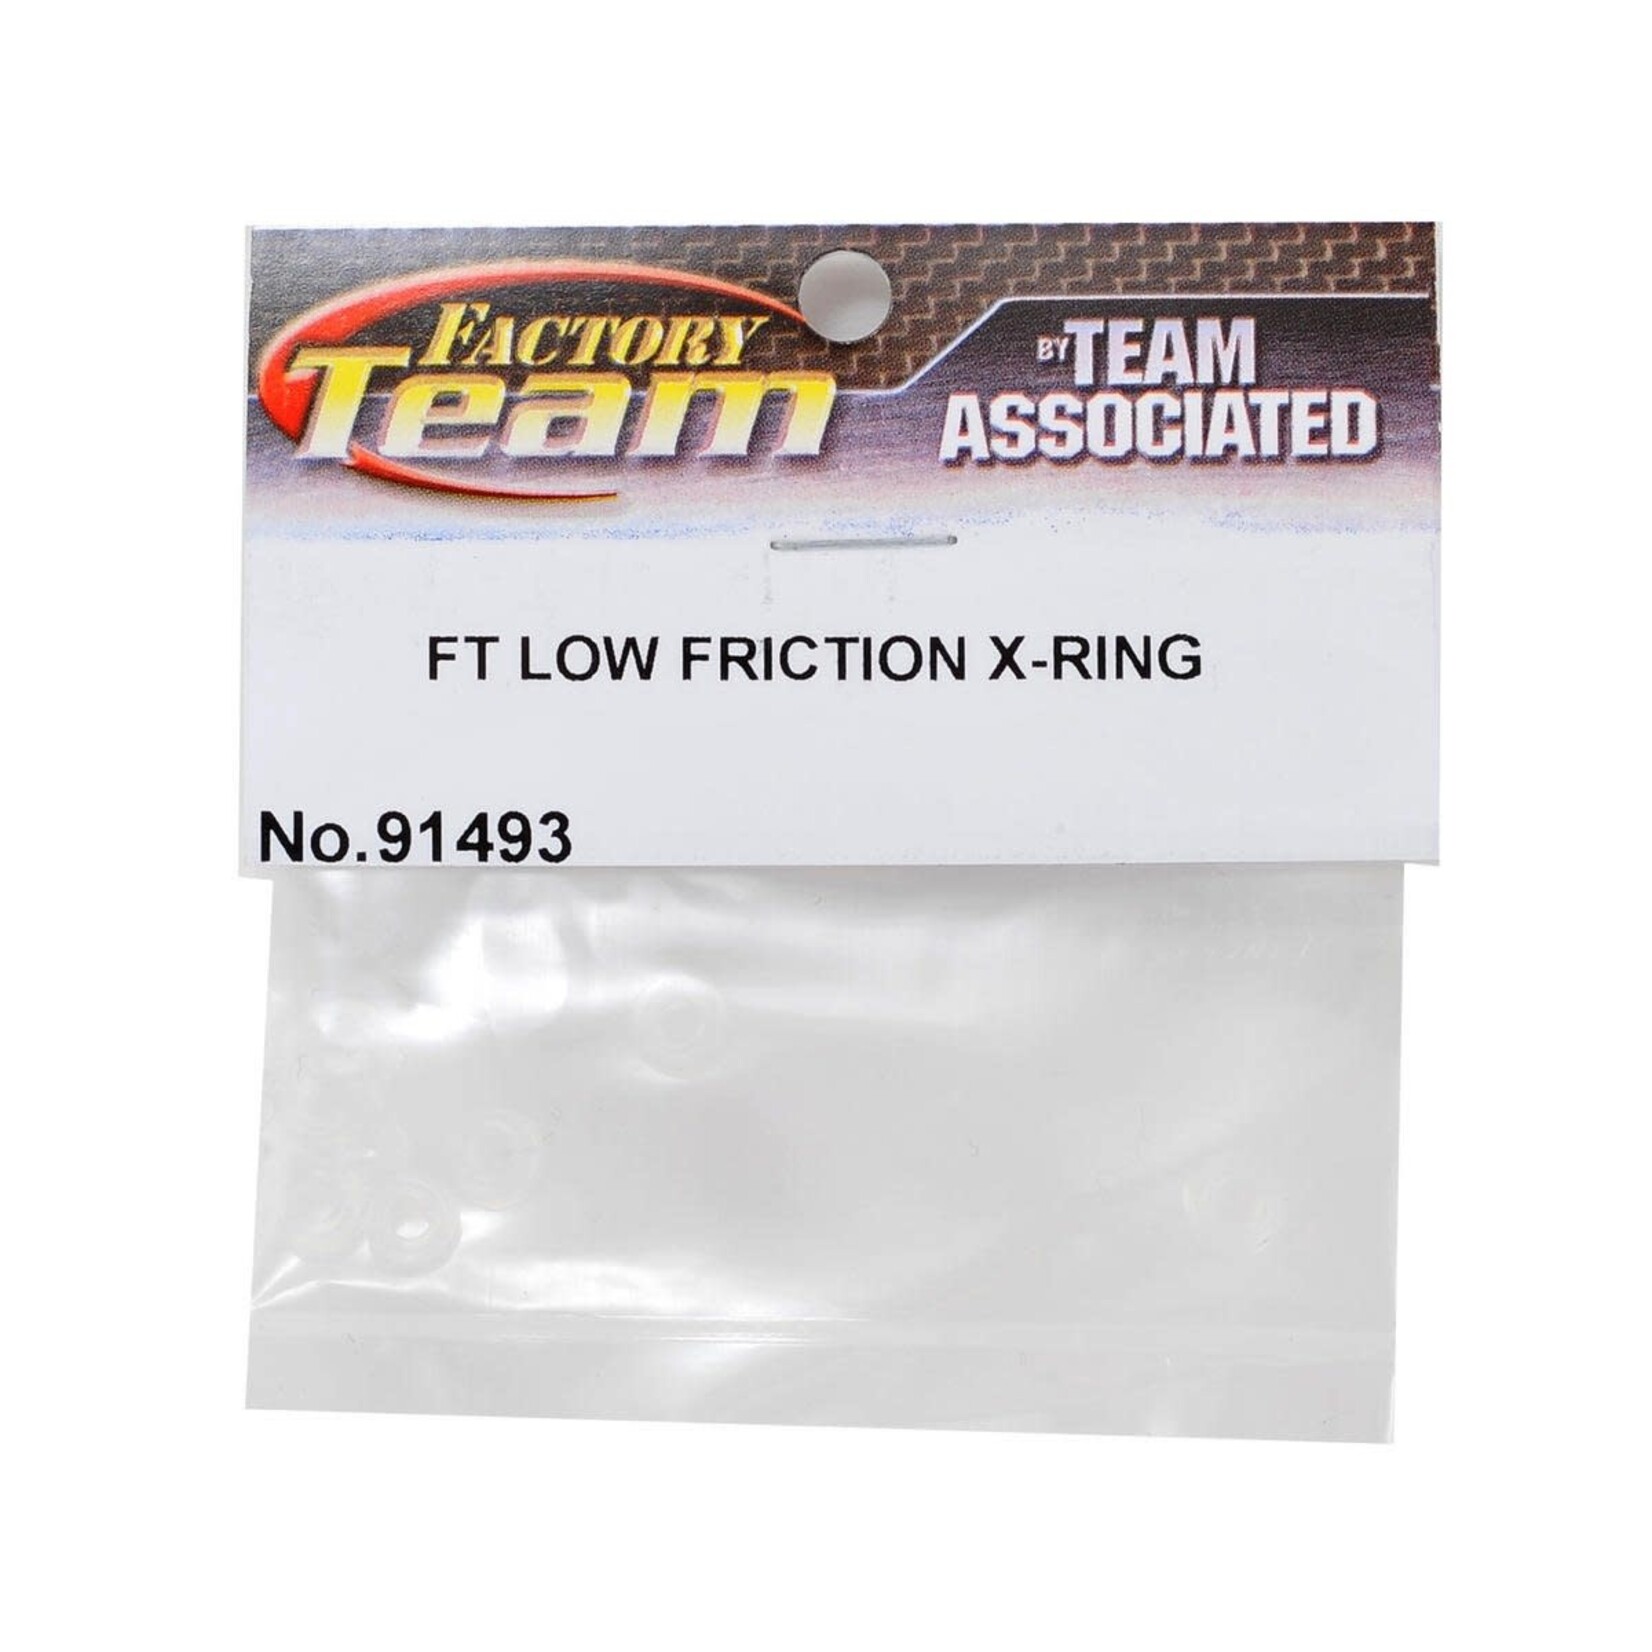 TEAM ASSOCIATED Factory Team Low Friction X-Rings